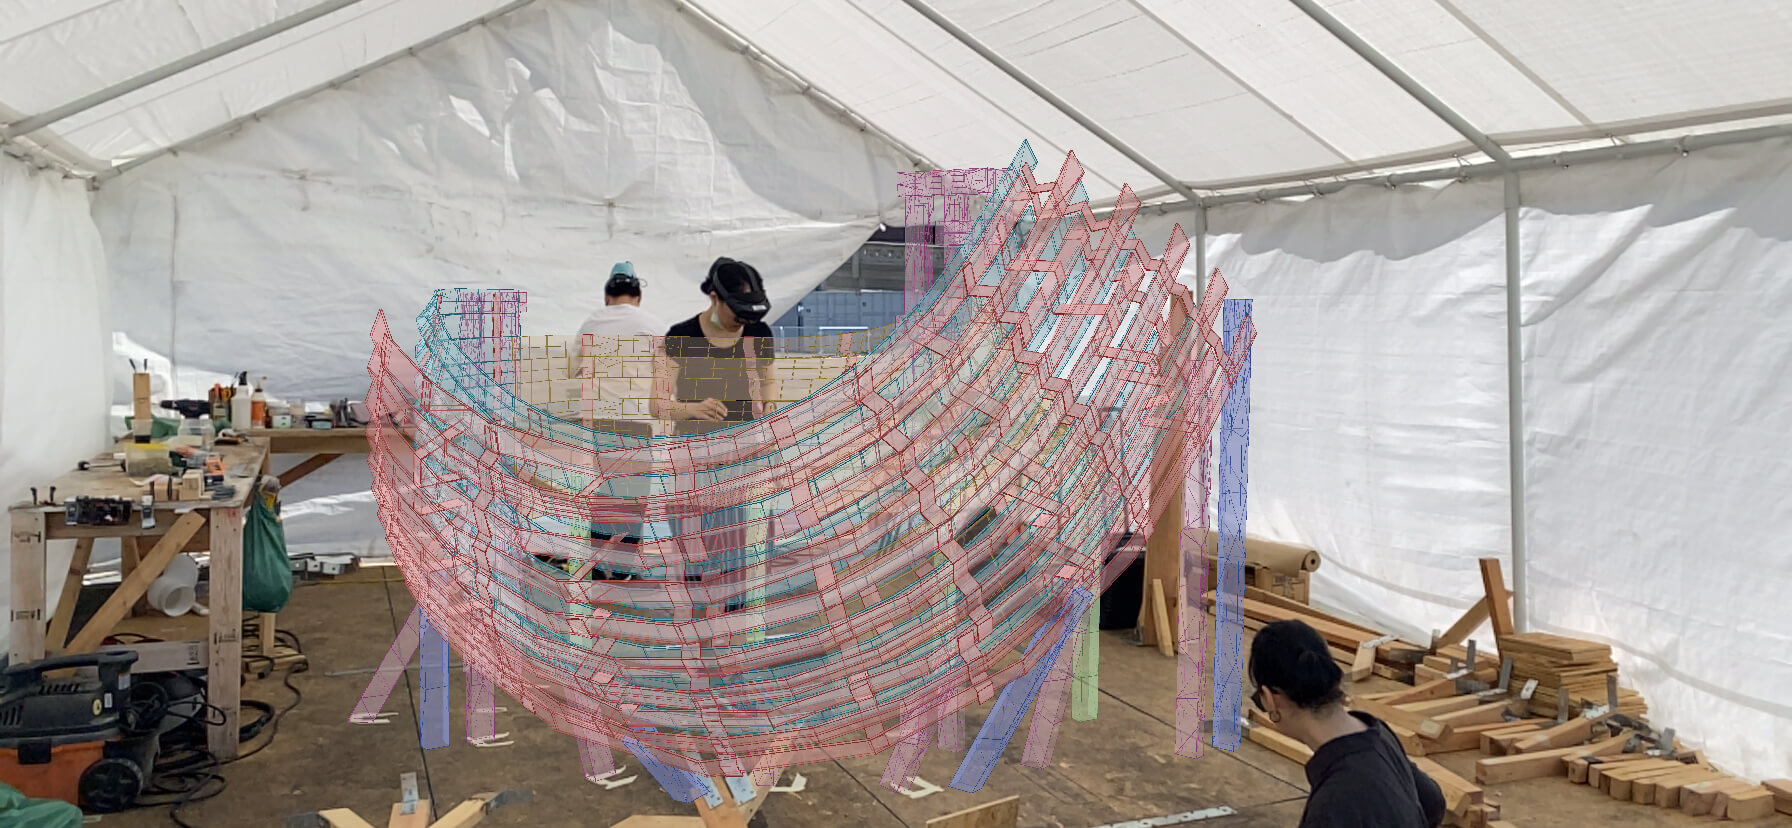 Construction of the pavilion at the center of 2001: a steam odyssey, using AR headsets